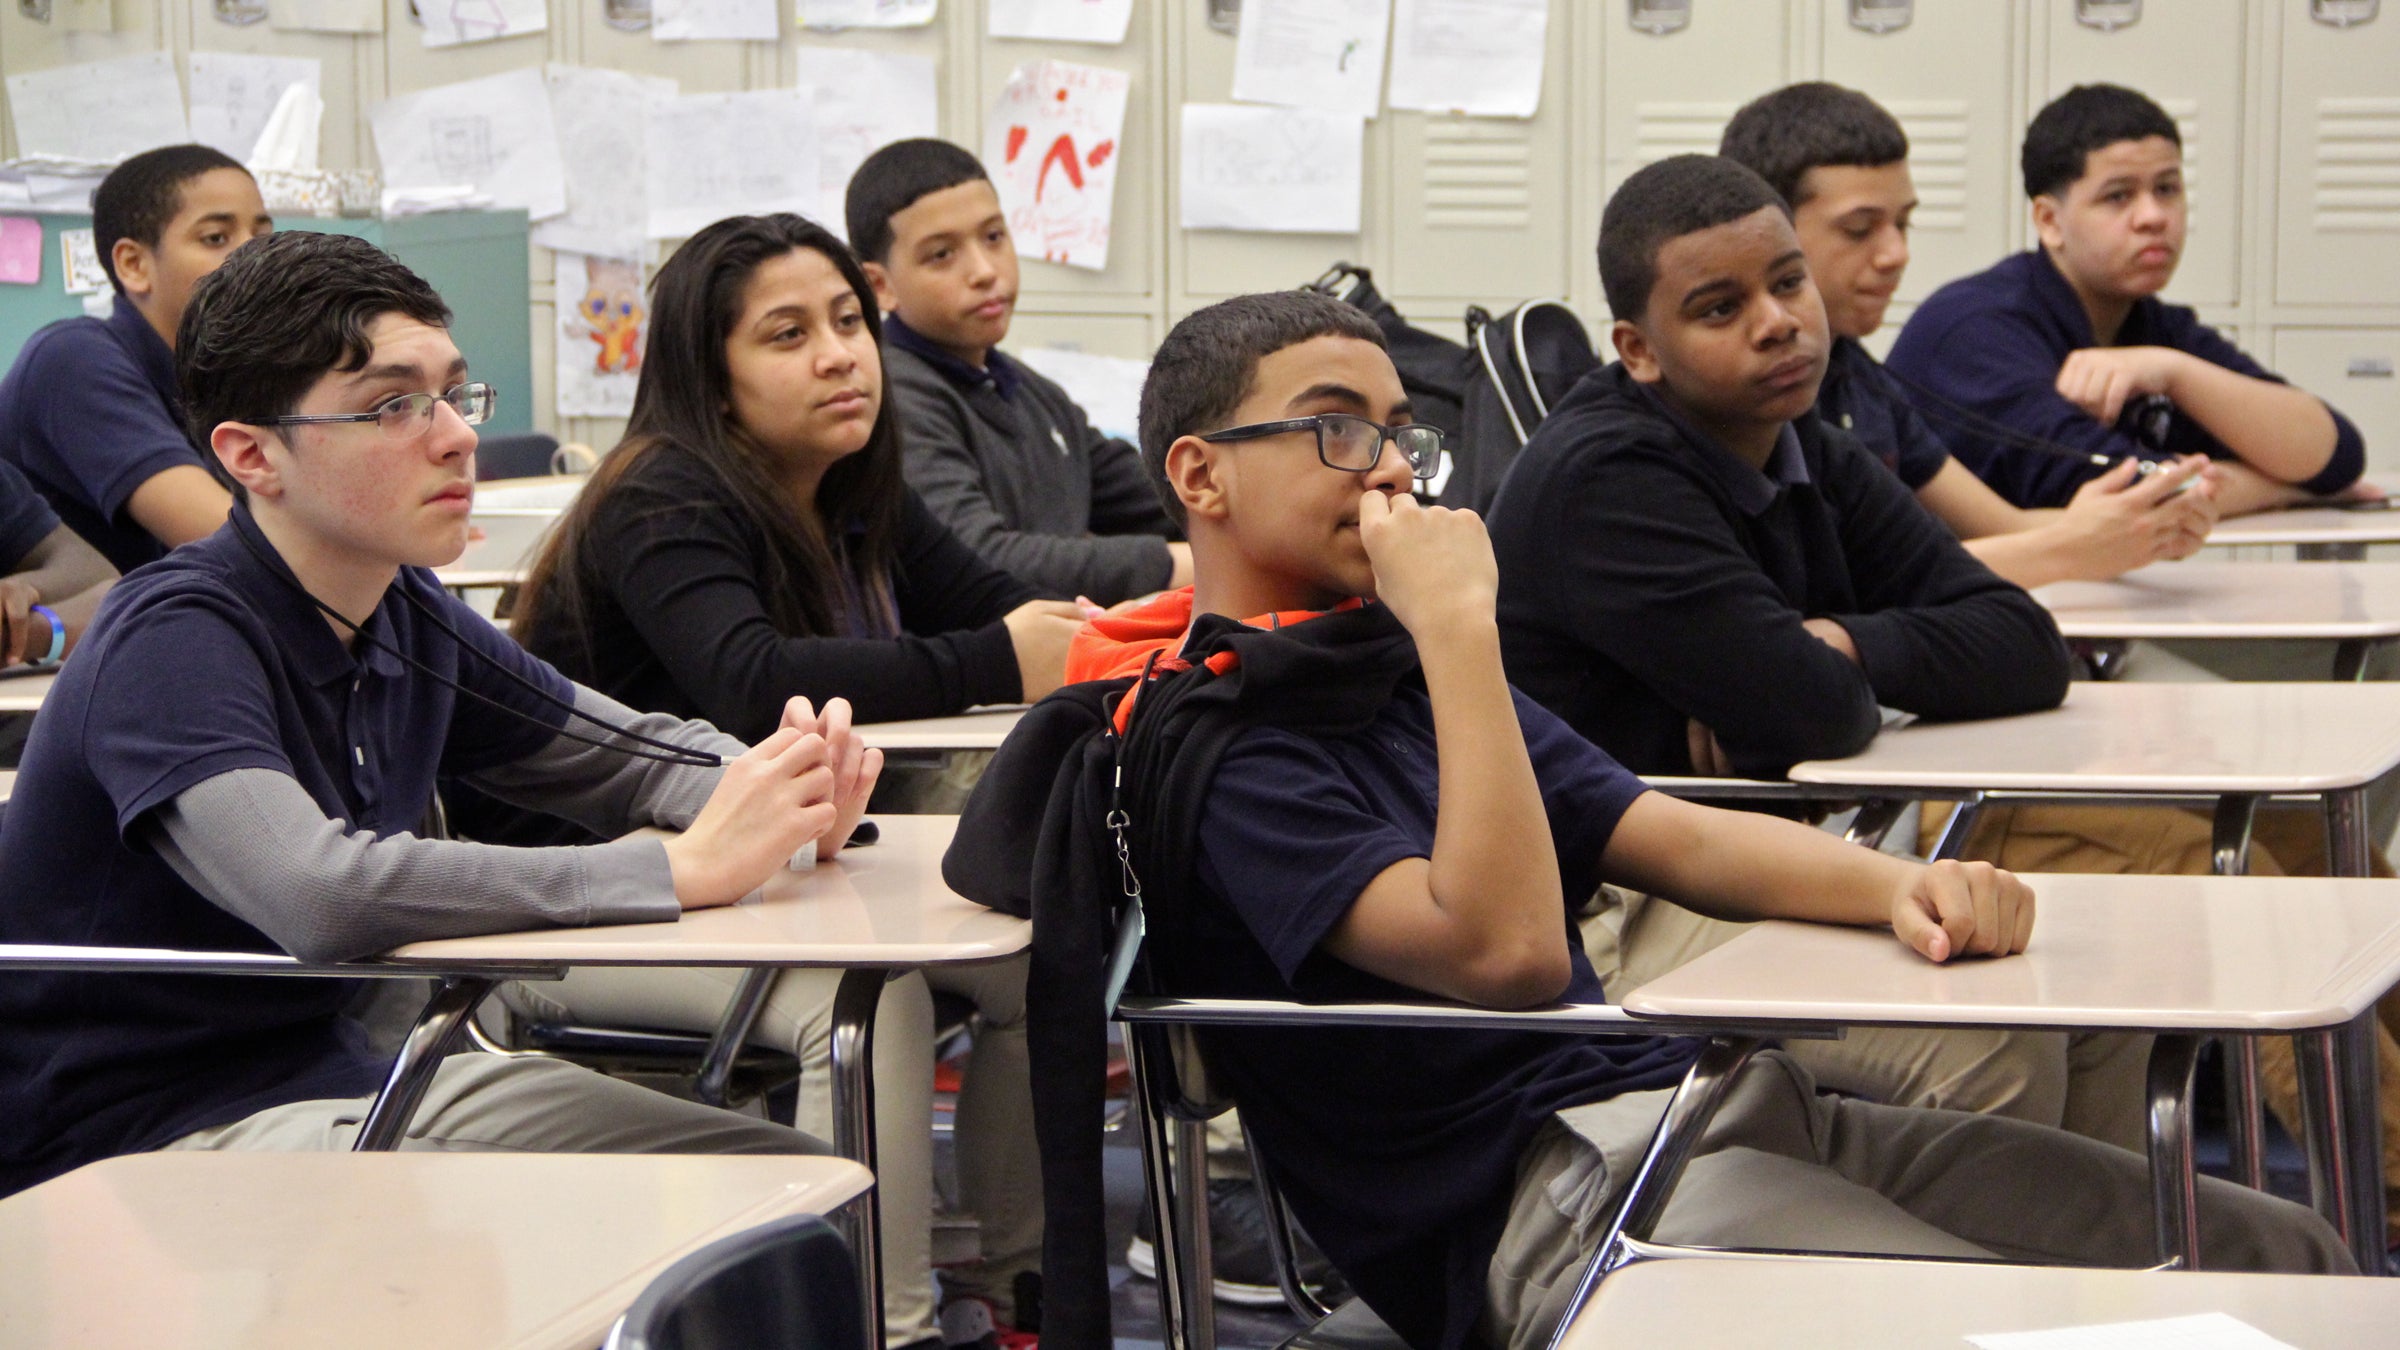  Students attend a sixth-grade class at Julia De Burgos school. The substitute teacher fill rate at De Burgos has improved, but it remains well below the district average. (Emma Lee/WHYY, file) 